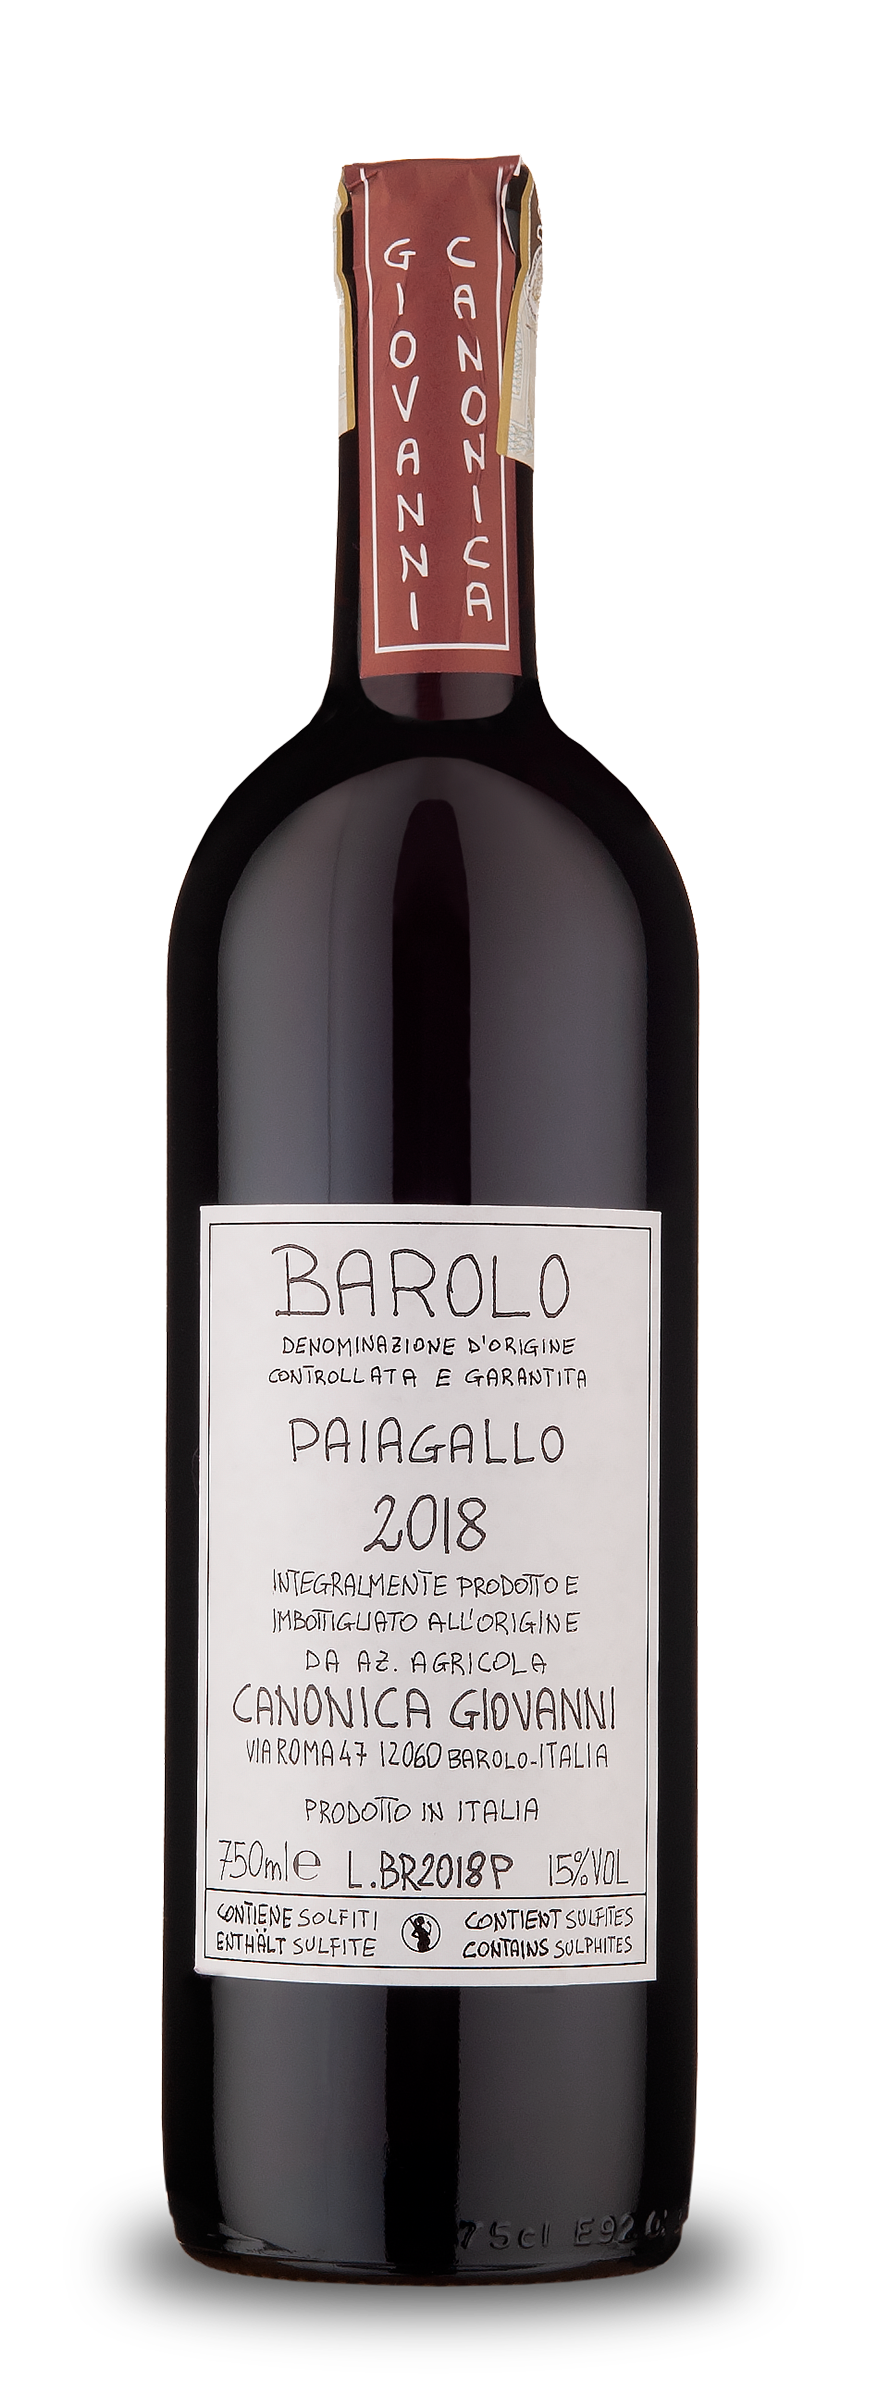 Barolo Paiagallo 2018 - ONLY ON PRE-ALLOCATION Contact us for further information (indulge@flemmings.wine)